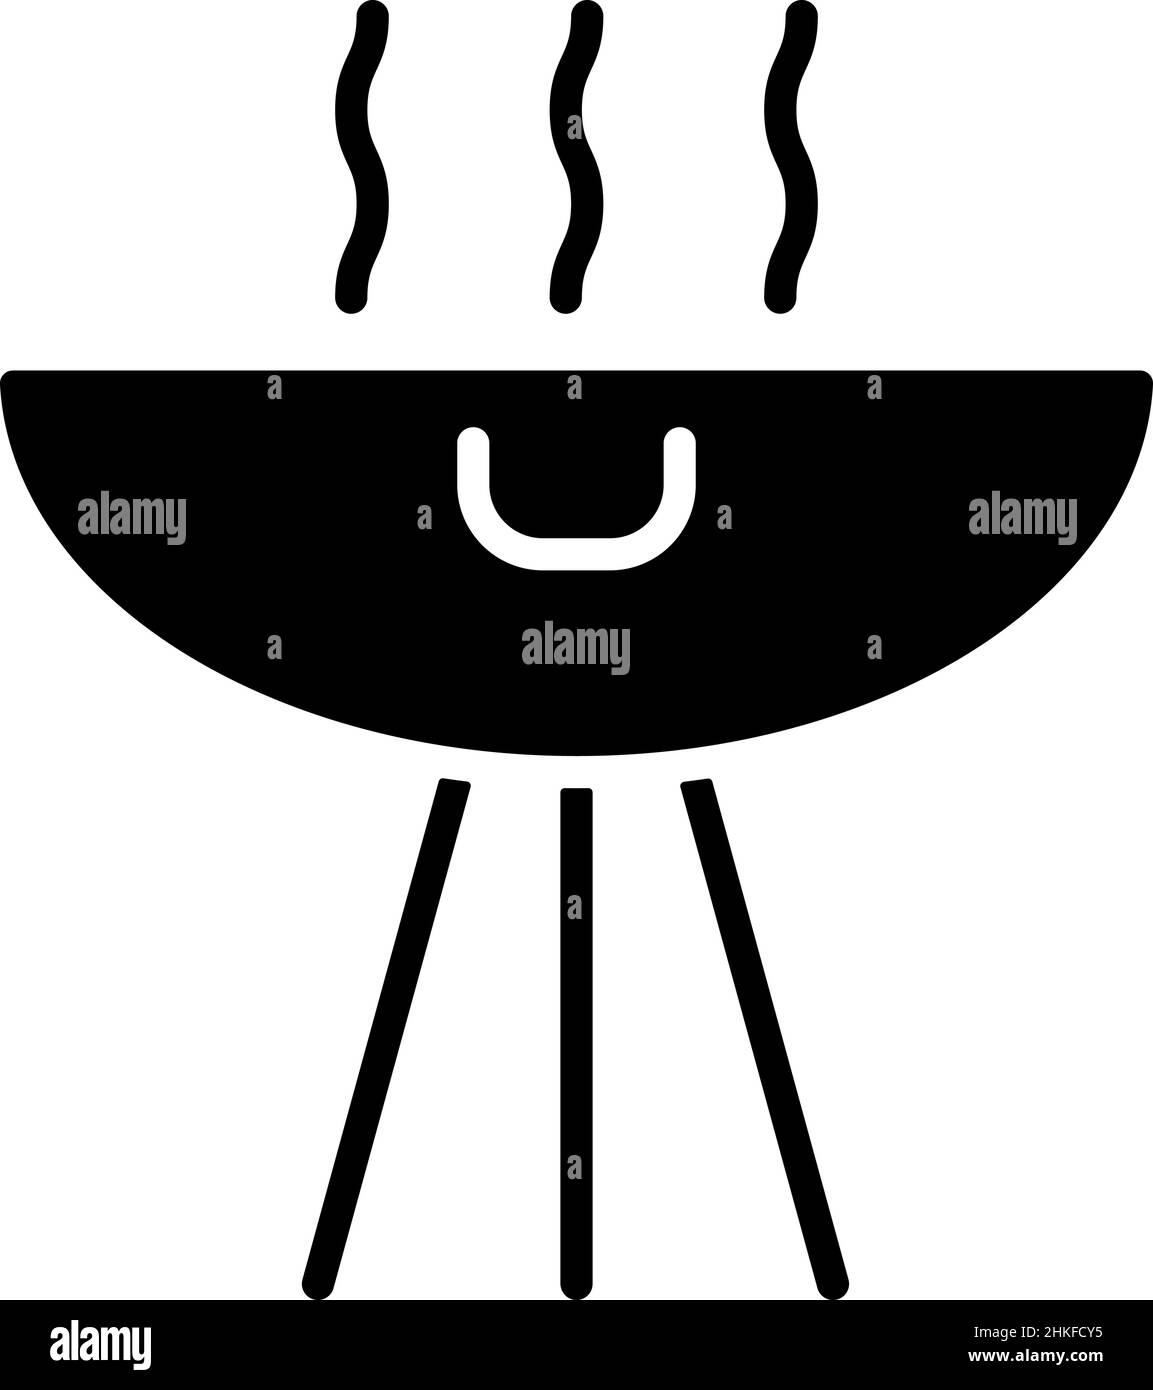 Grilled Barbeque Glyph Icon Food Vector  Stock Vector